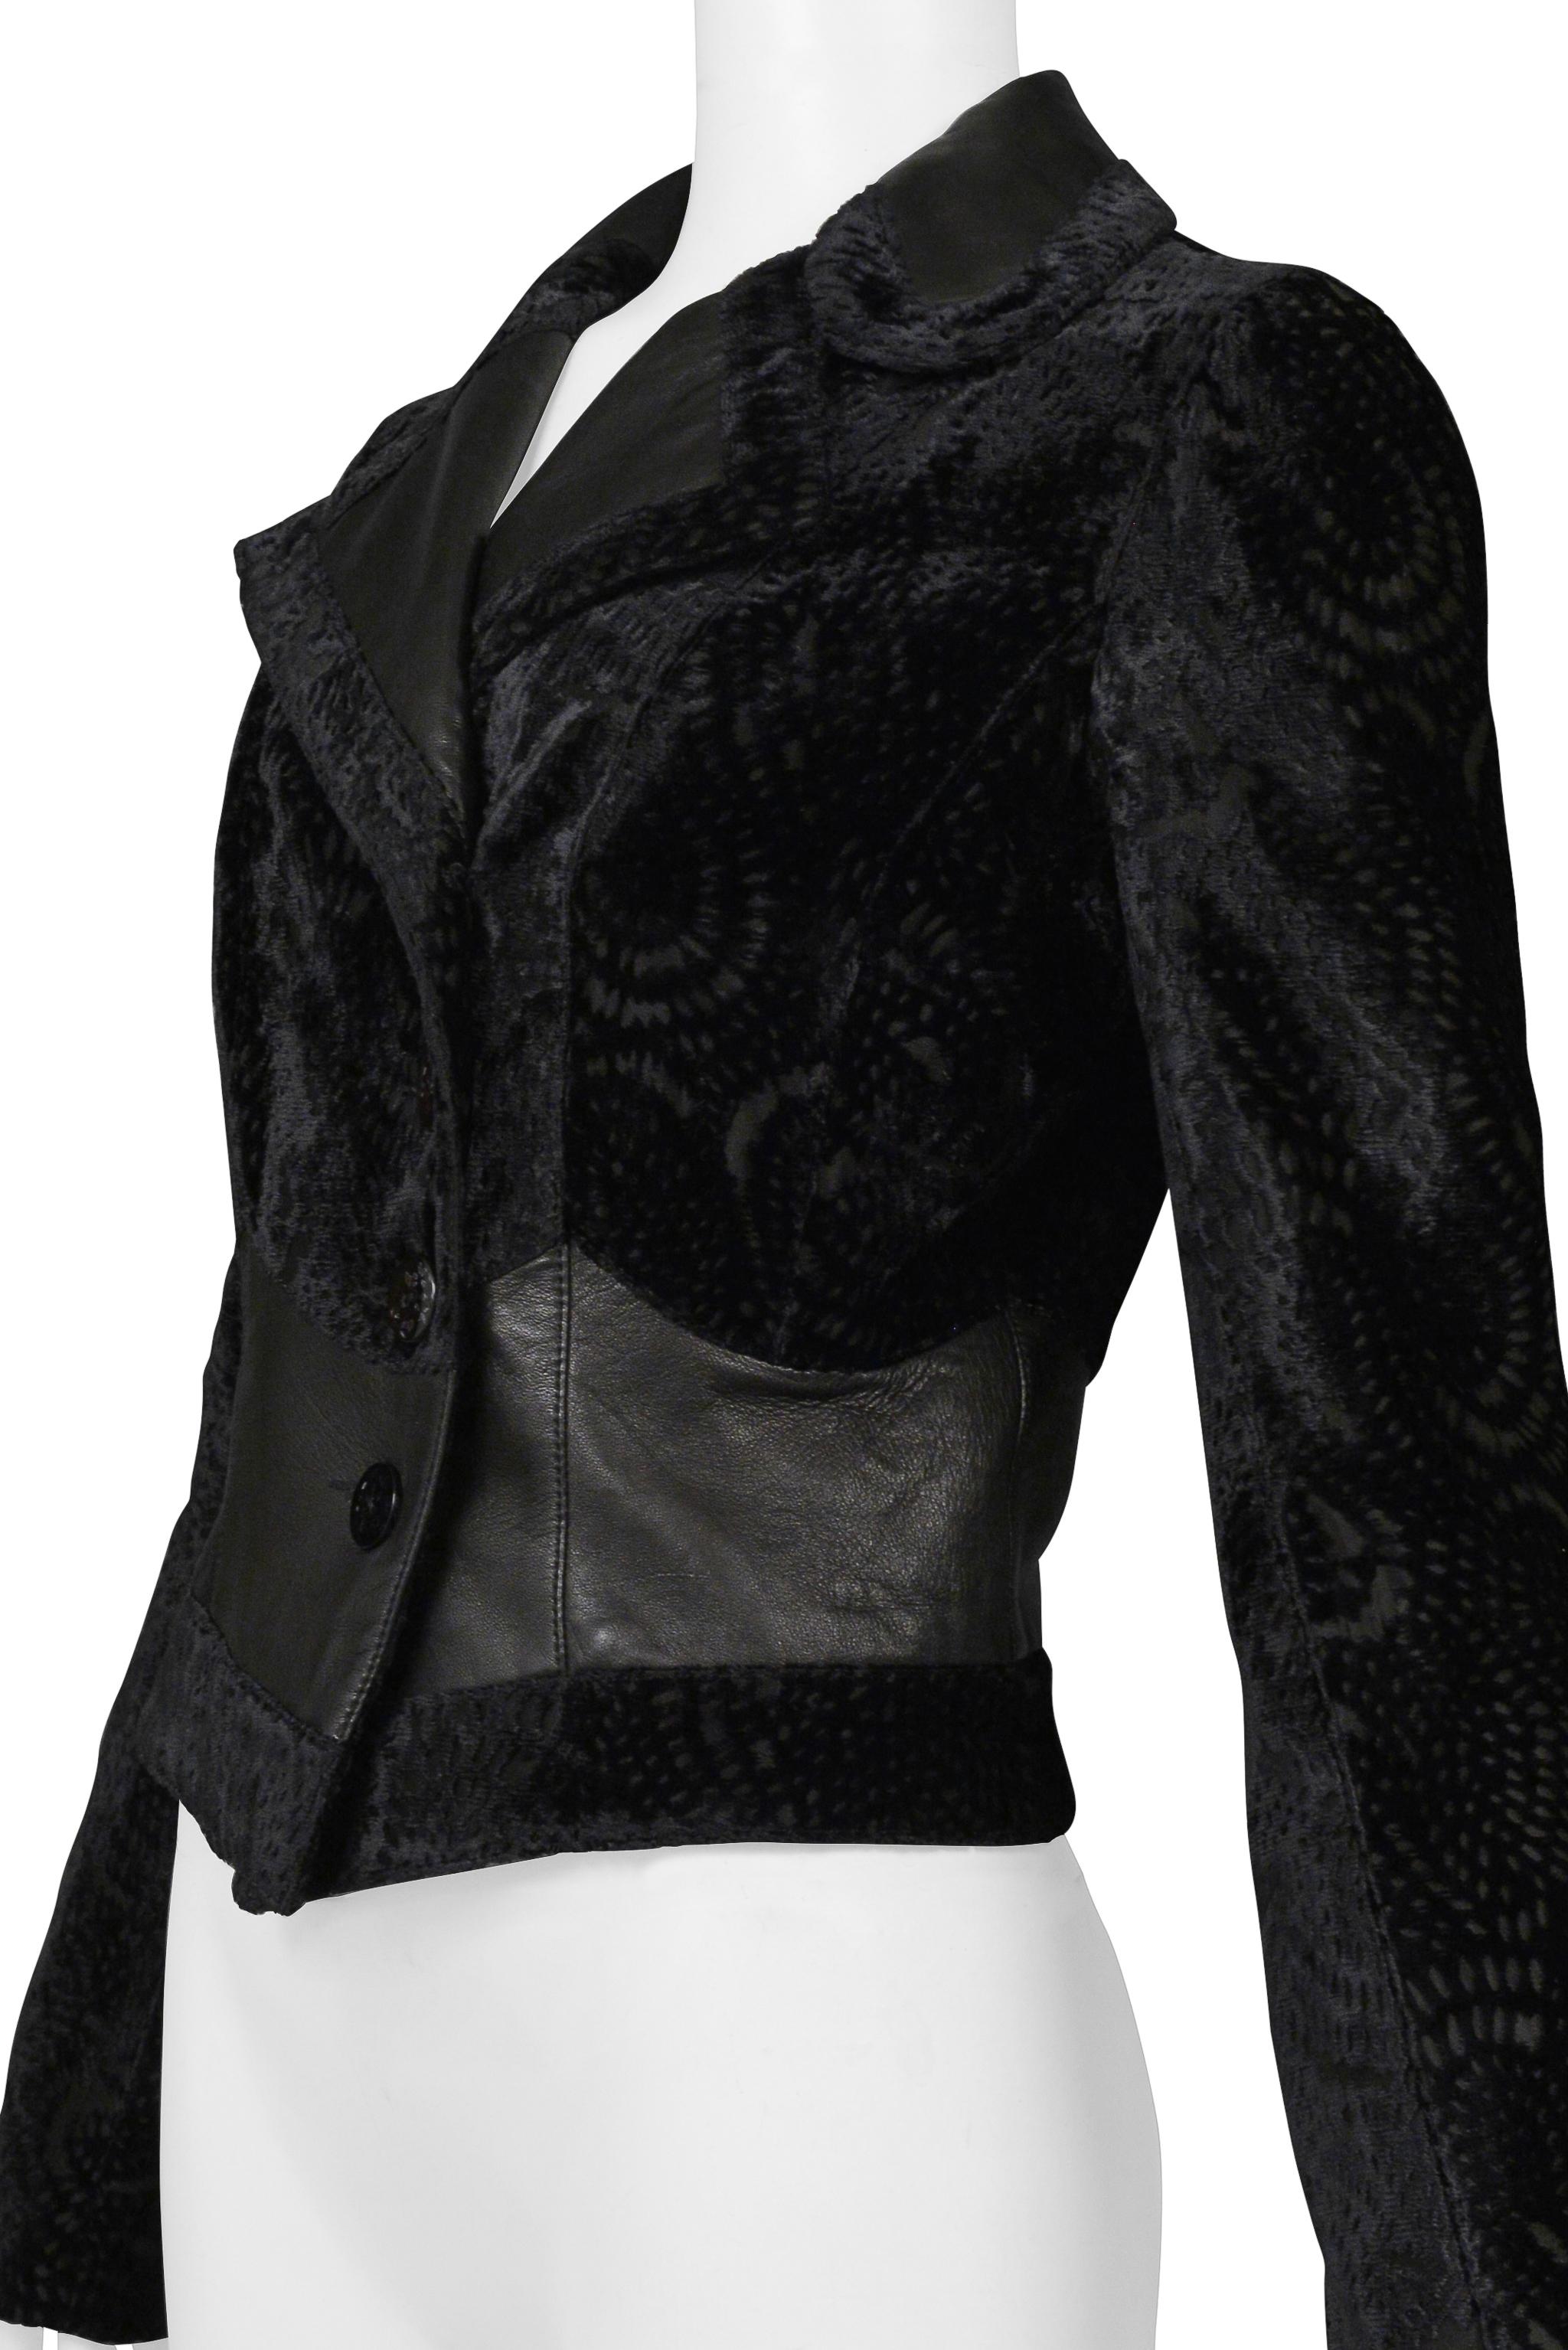 John Galliano Black Floral Silk Velvet Jacket With Leather Insets 2005 For Sale 1